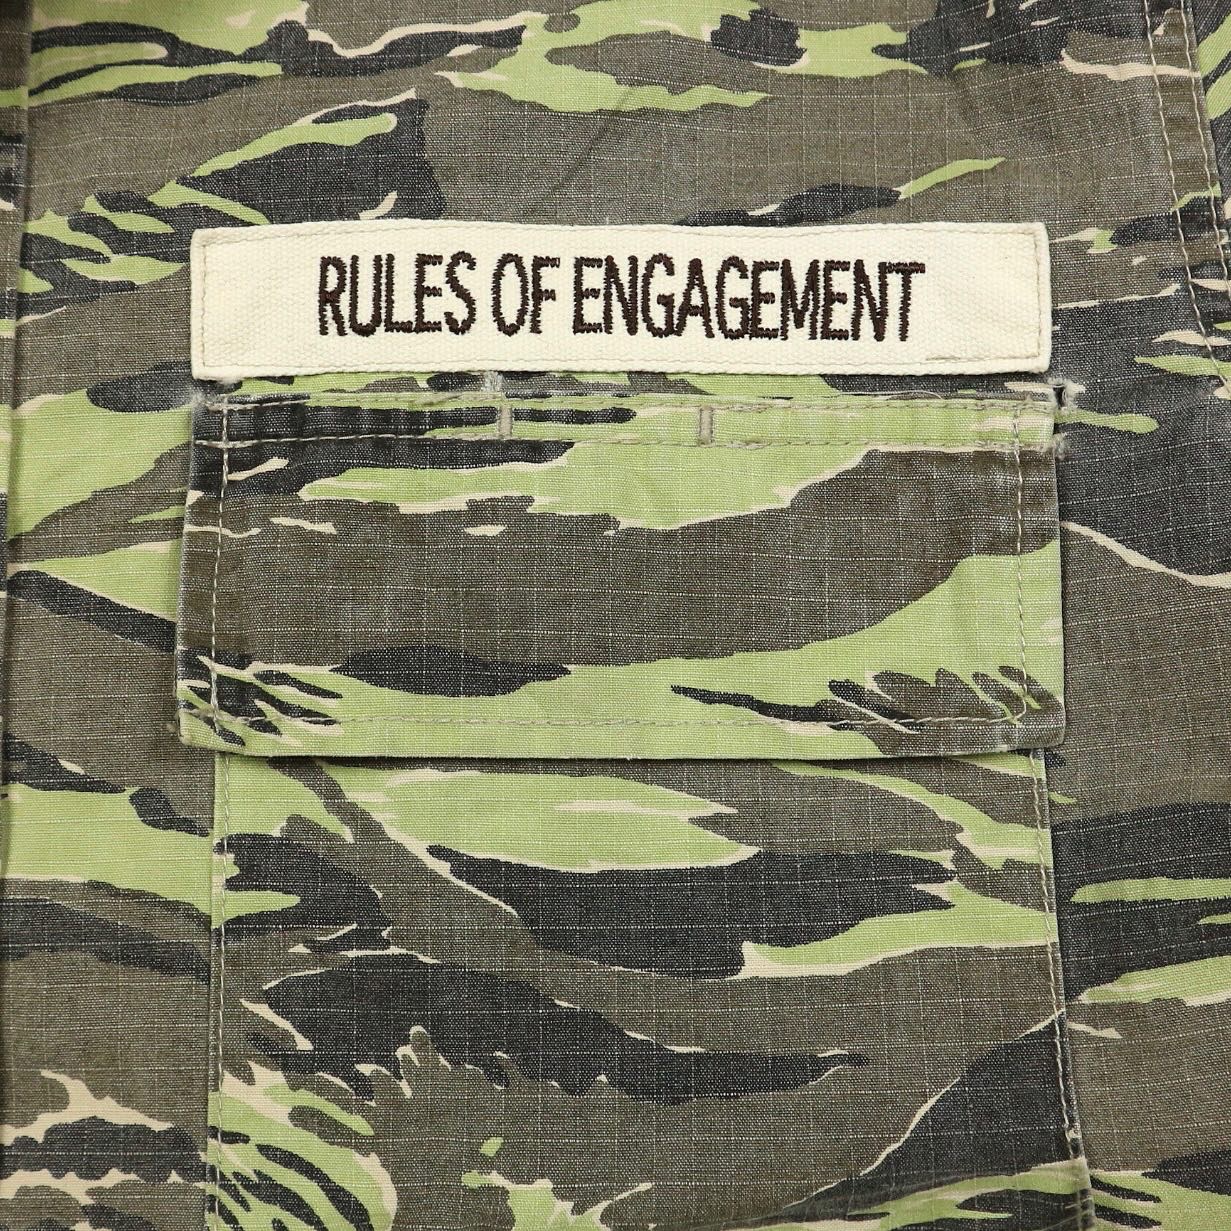 Rules Of Engagement Military Jacket Size L